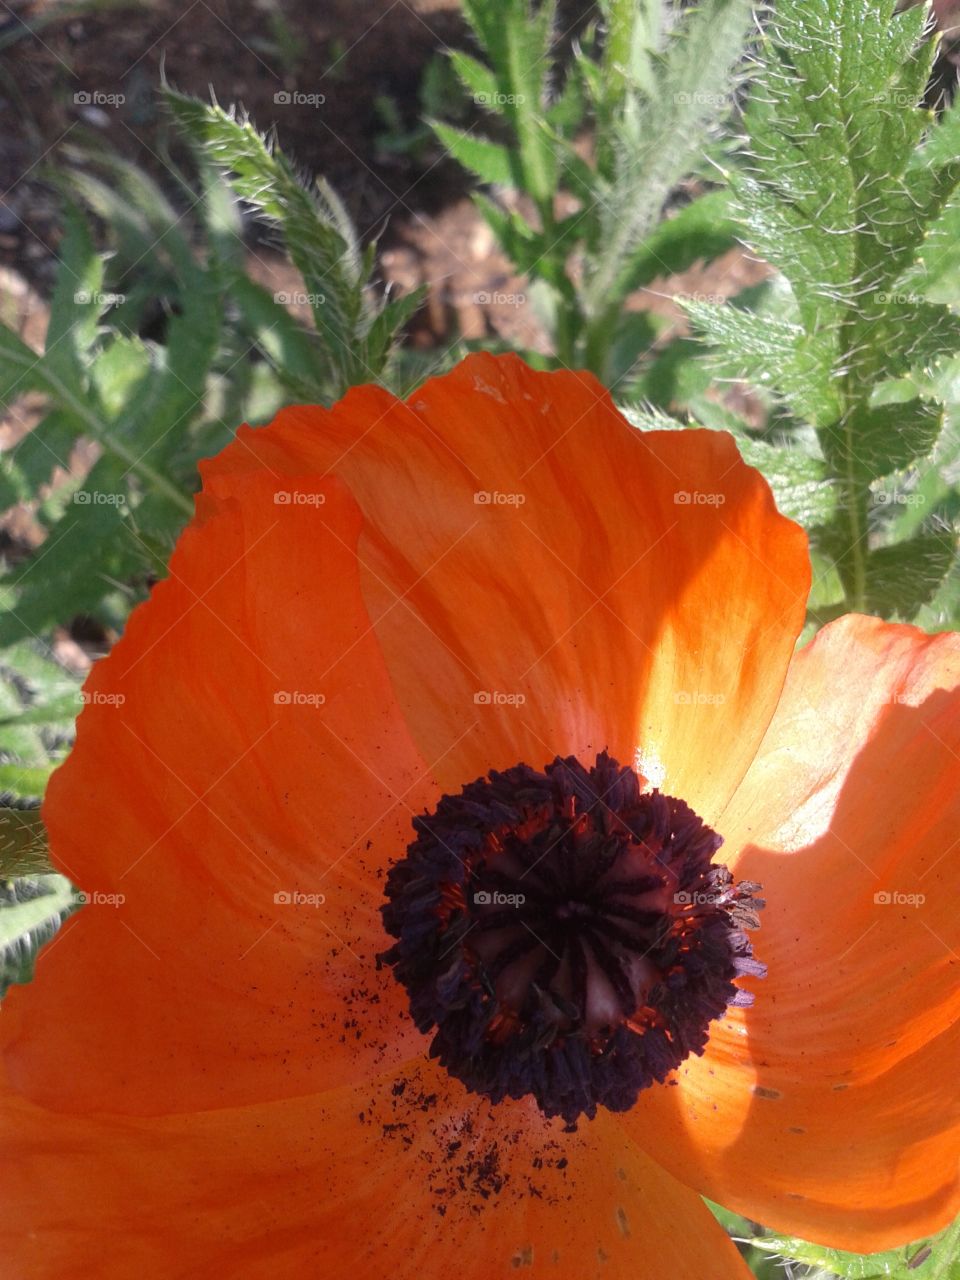 Poppy. The sun kissed petal on this Poppy shows the bold color of orange